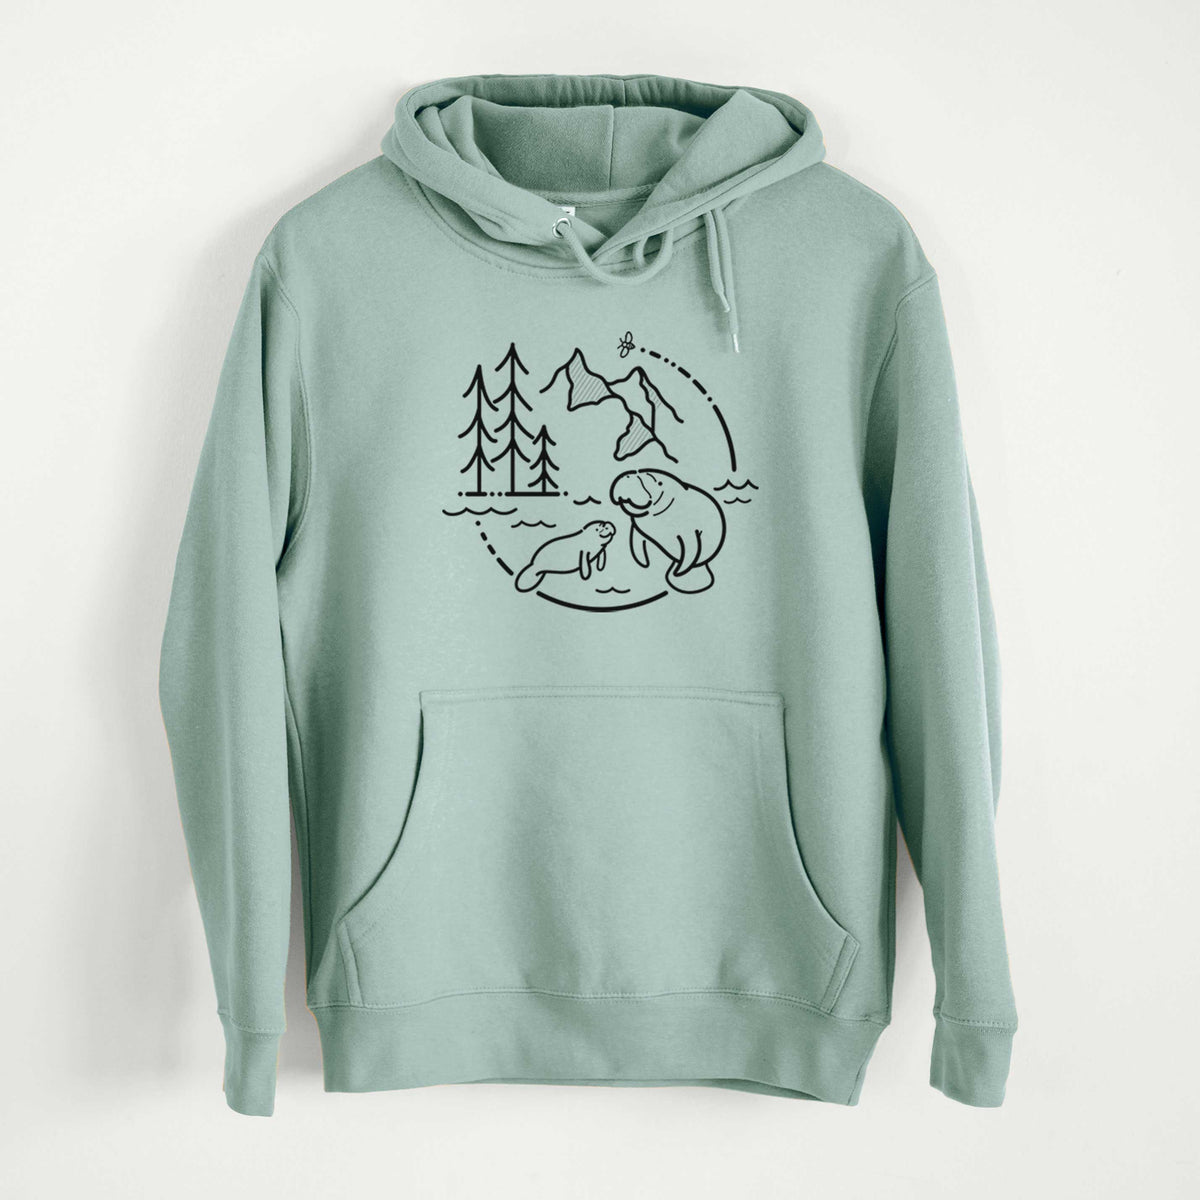 It&#39;s All Connected - Manatee  - Mid-Weight Unisex Premium Blend Hoodie